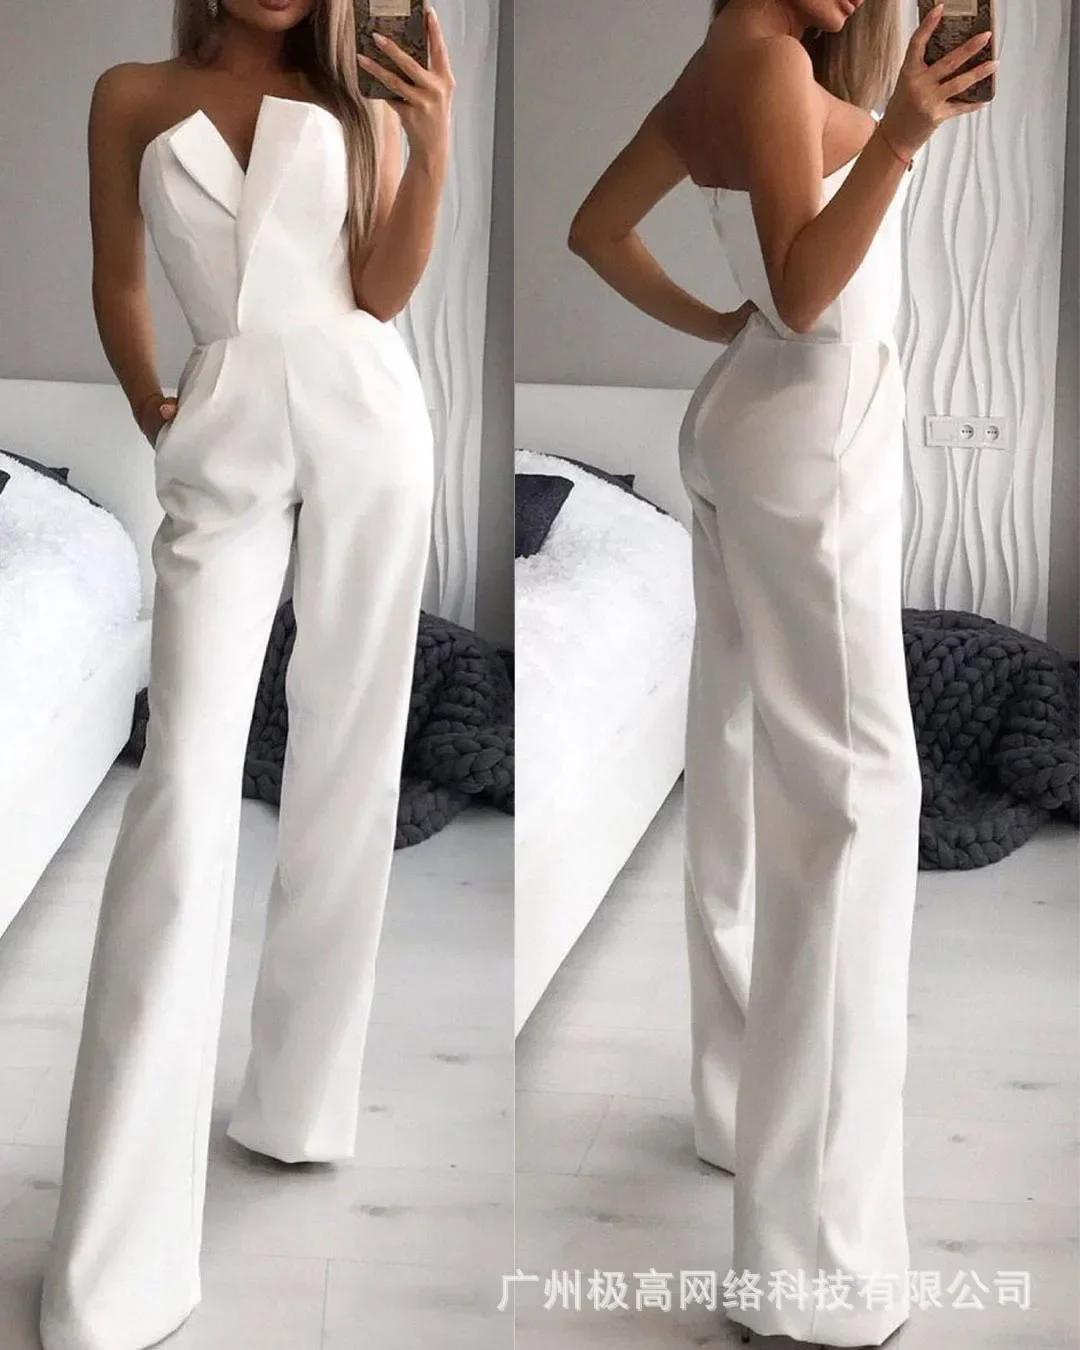 Jumpsuits for Women Jumpsuits Sexy Strapless Slim Office Lady  Elegant Chic Sleeveless Black White Red Casual Romper Bodysuit